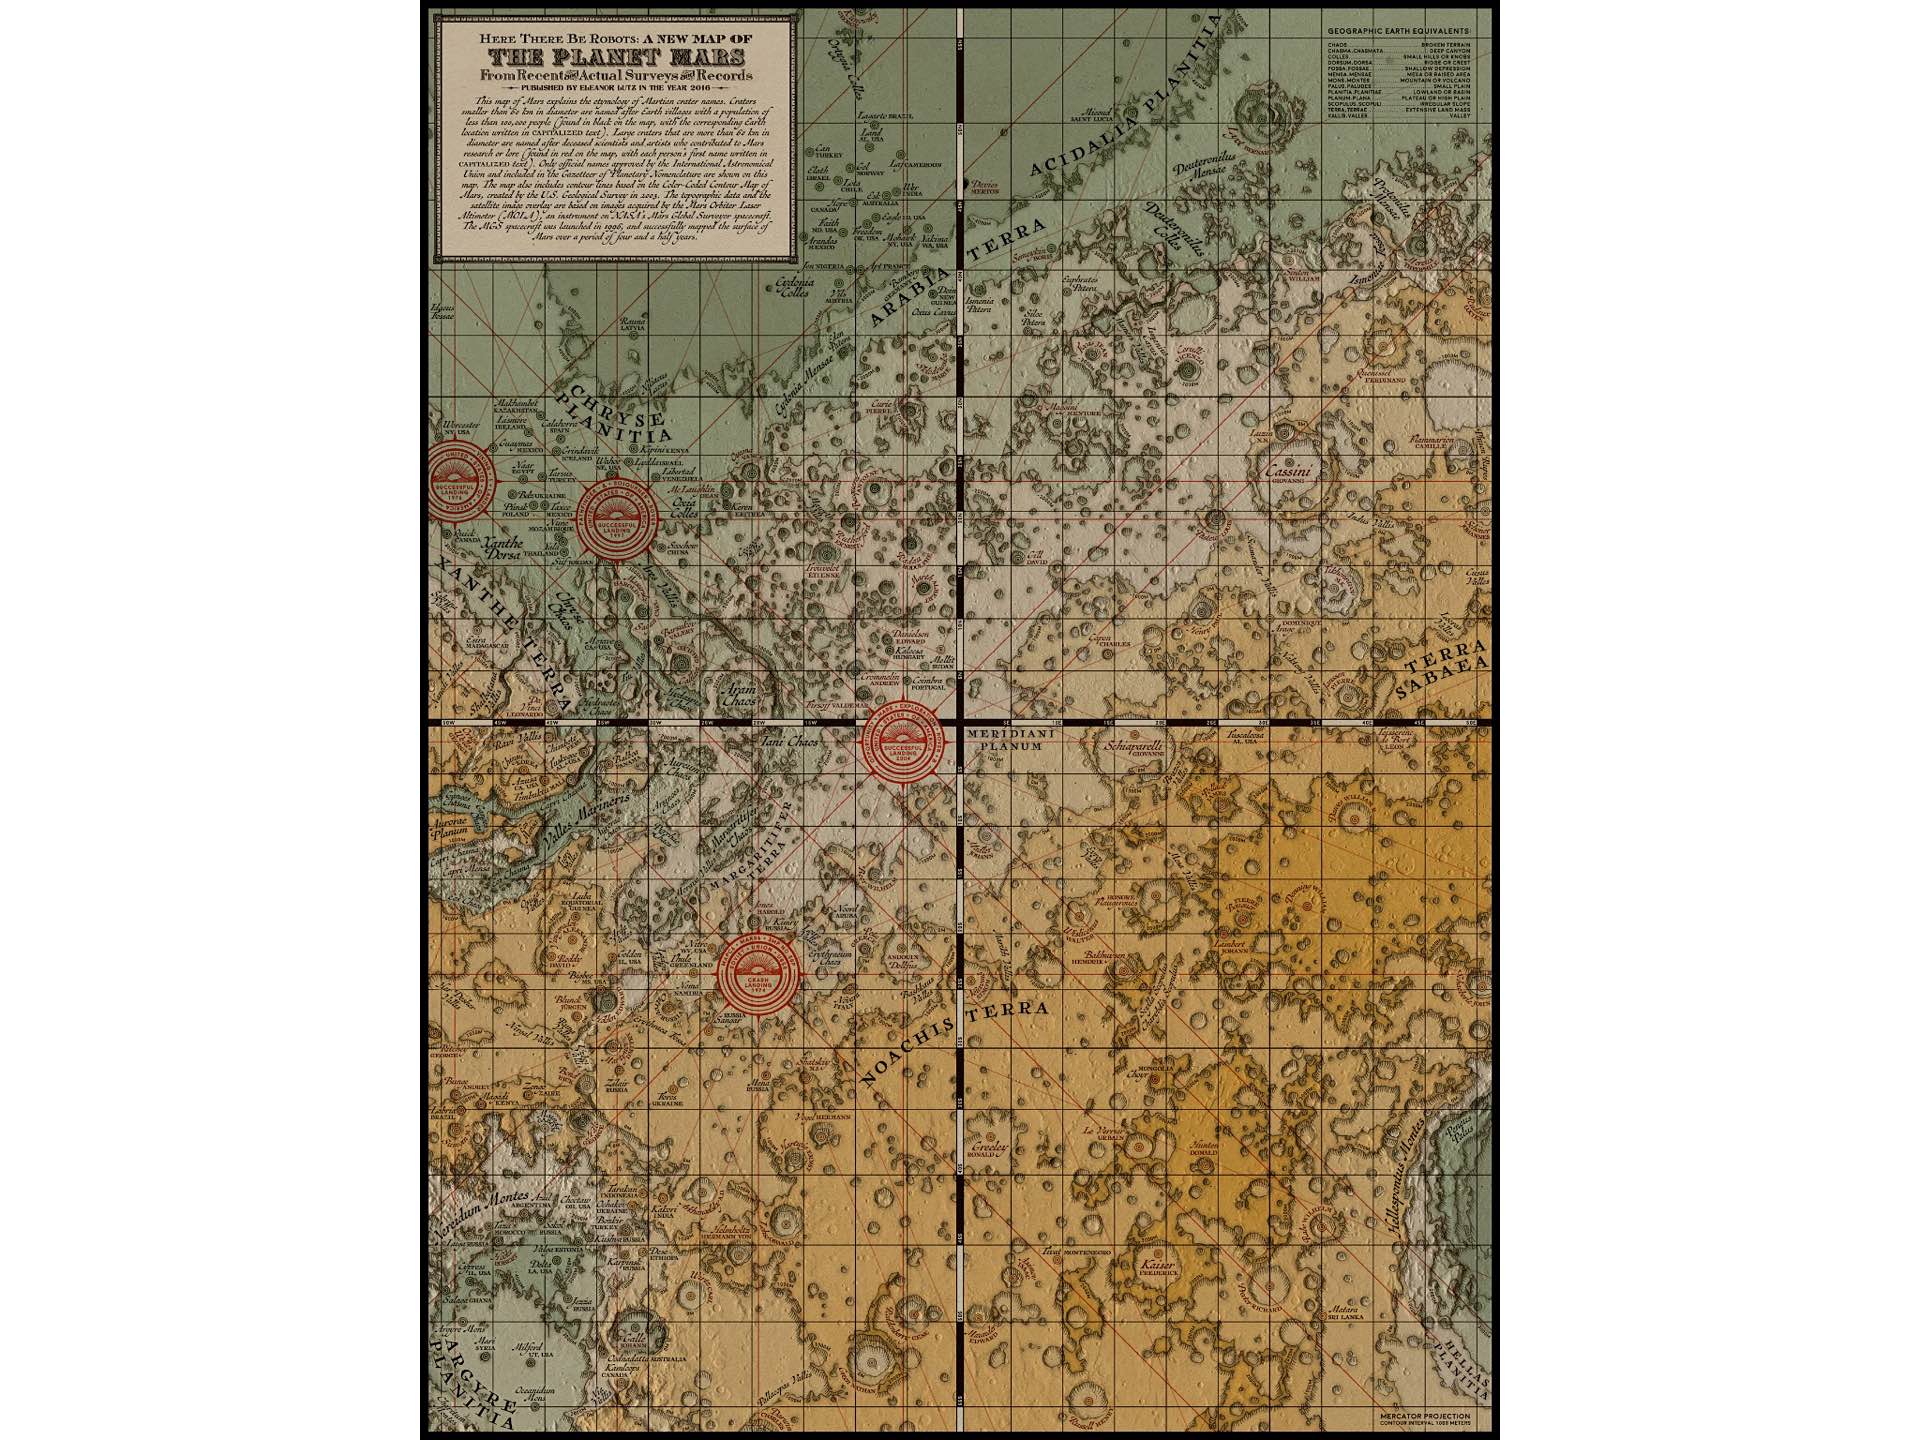 "Here There Be Robots" Victorian-style map of Mars by Eleanor Lutz. (Price varies based on item format)